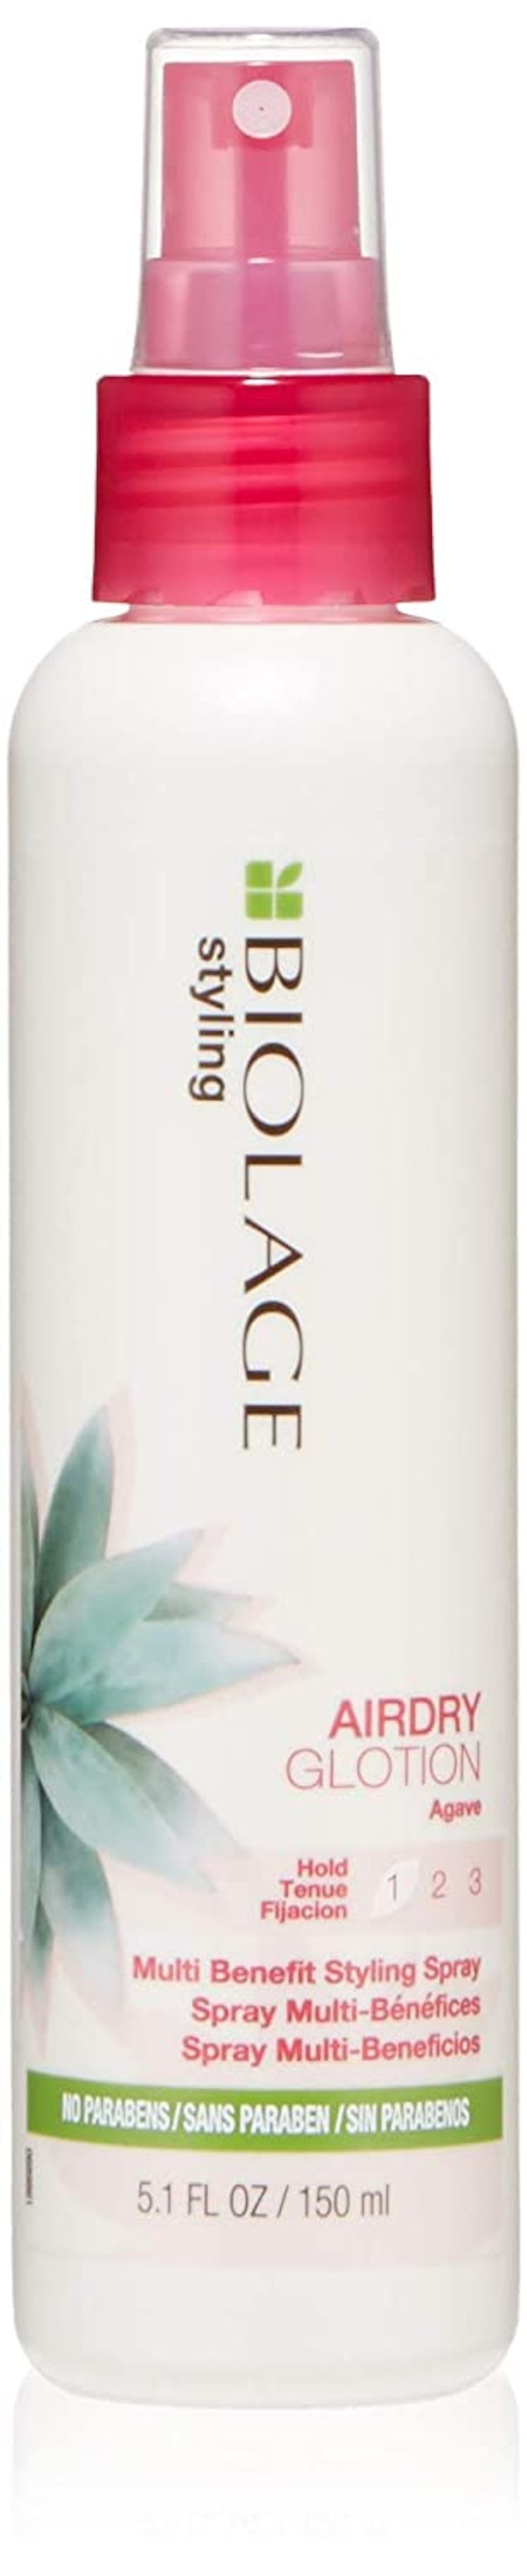 Biolage Styling Airdry Glotion